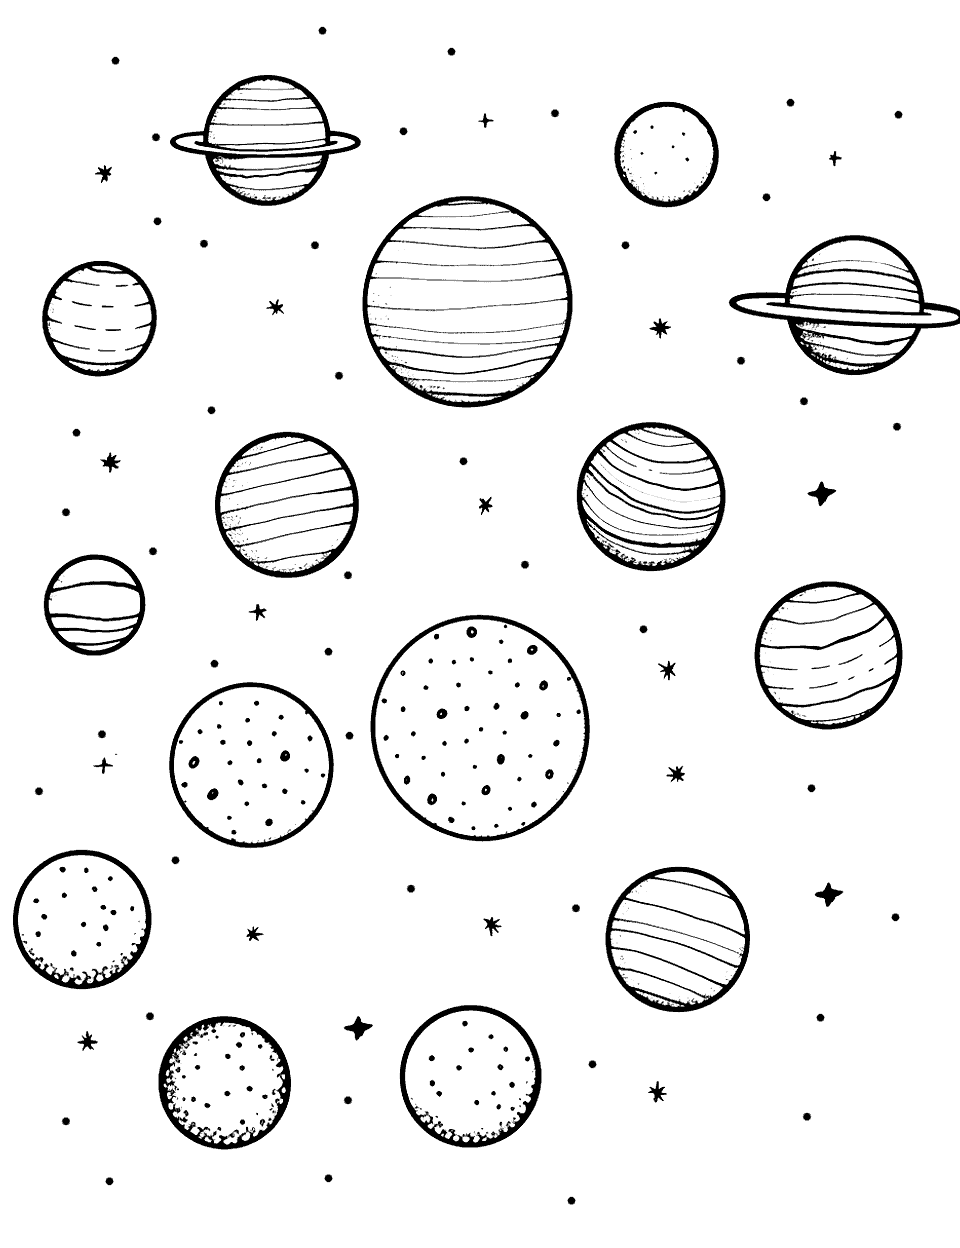 Uranus' Moons Solar System Coloring Page - Several of Uranus’ 27 moons in various sizes and positions.